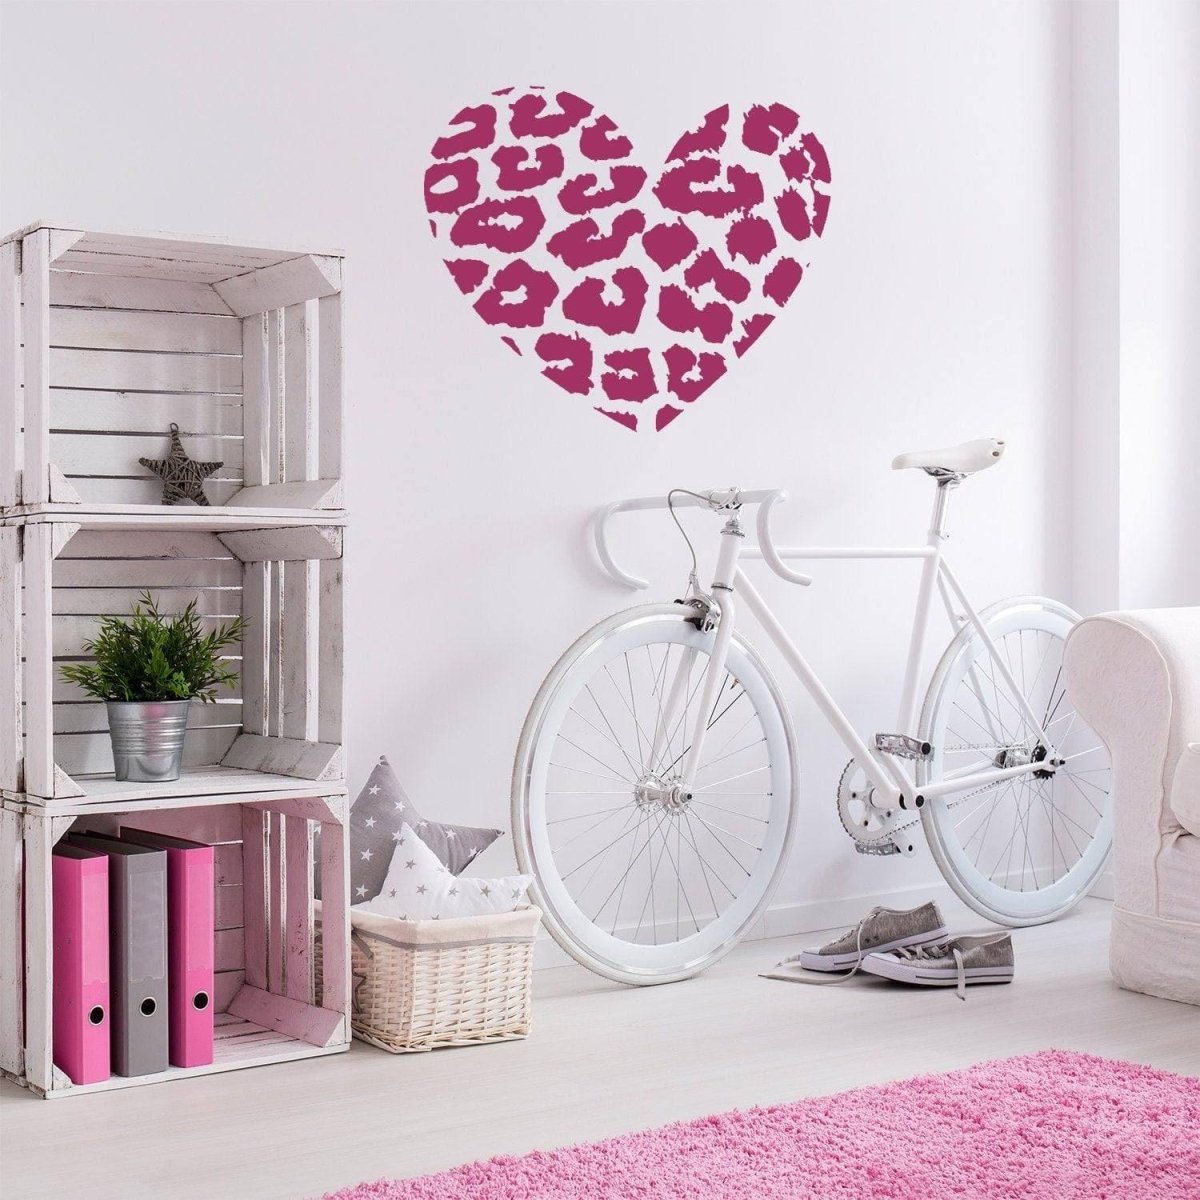 Leopard Heart Vinyl Wall Decal - Exquisite Wildlife Art for Your Space - Decords